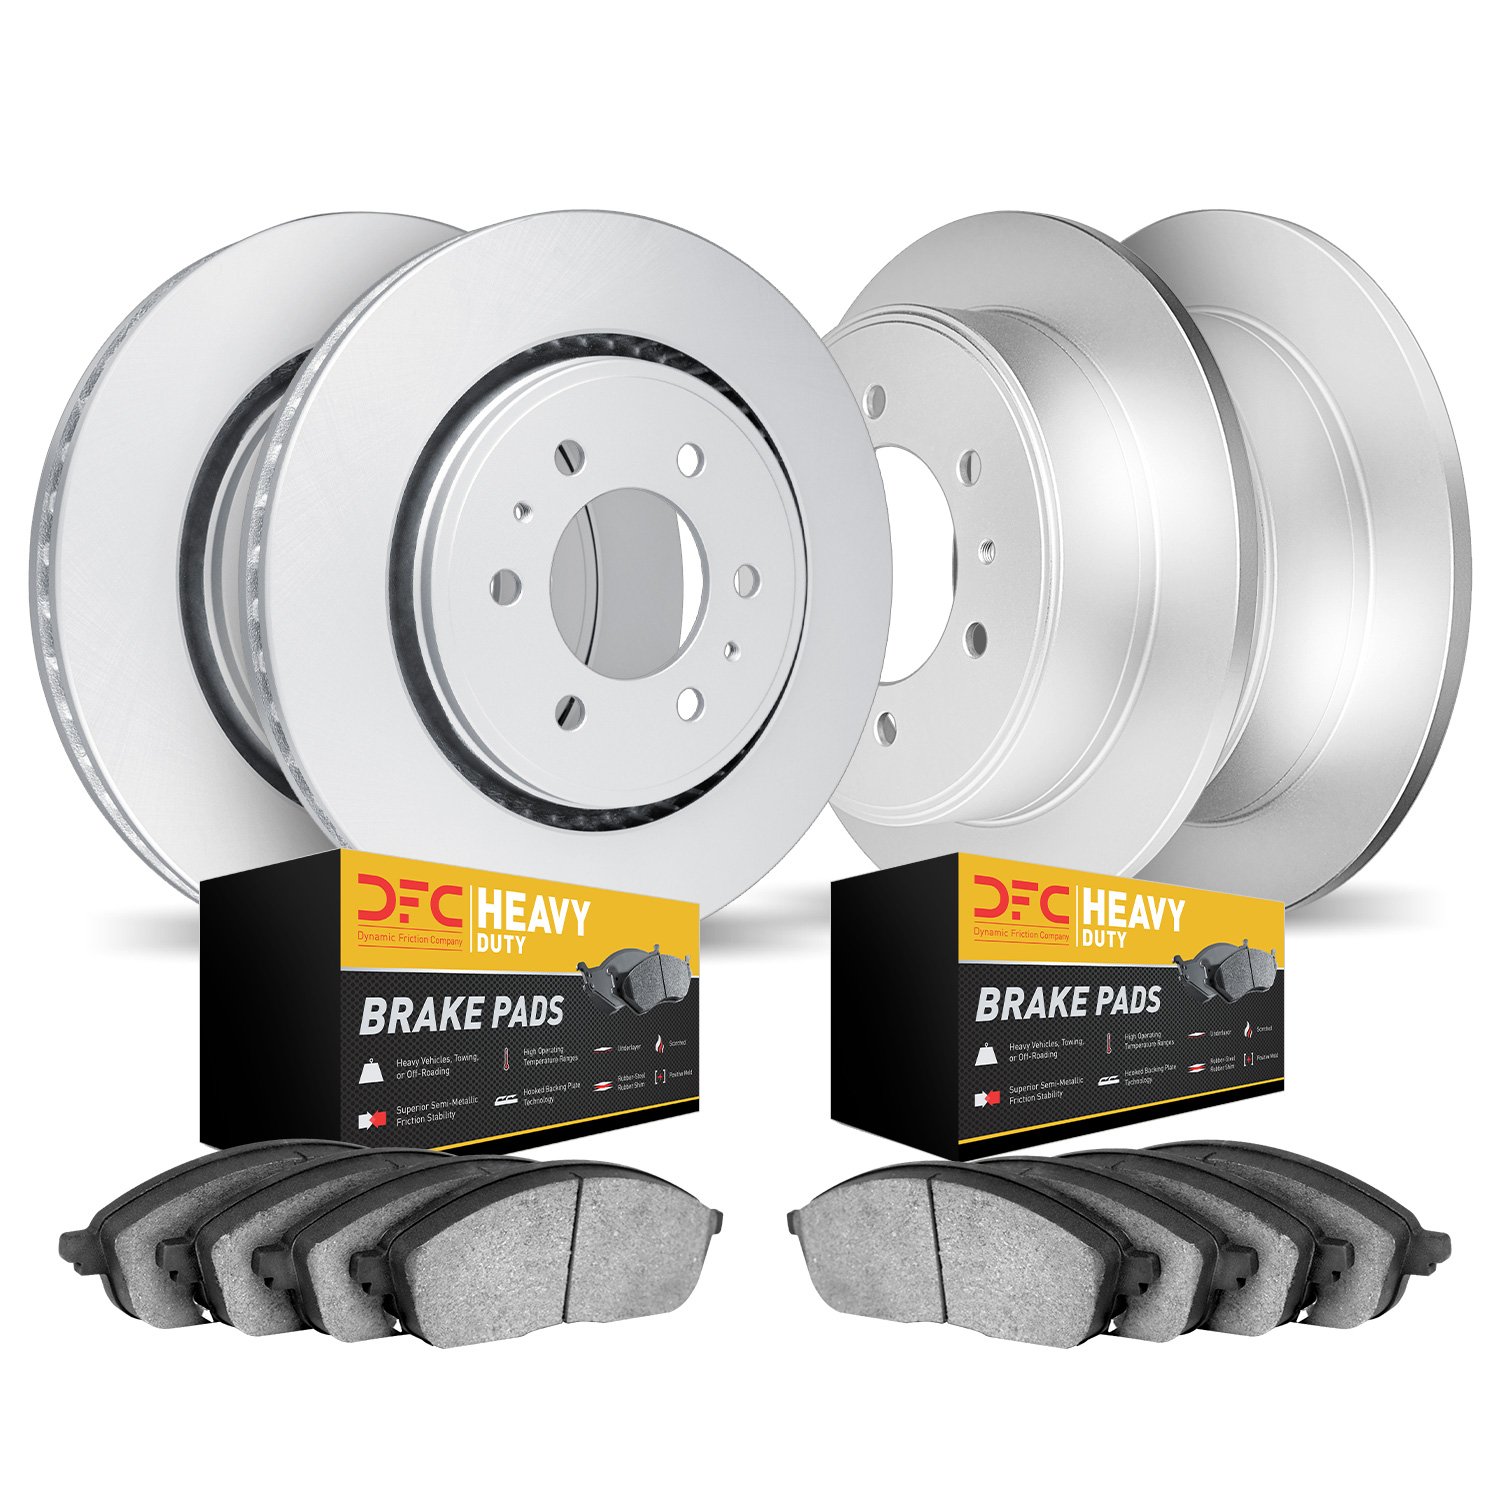 4204-40089 Geospec Brake Rotors w/Heavy-Duty Brake Pads Kit, Fits Select Multiple Makes/Models, Position: Front and Rear